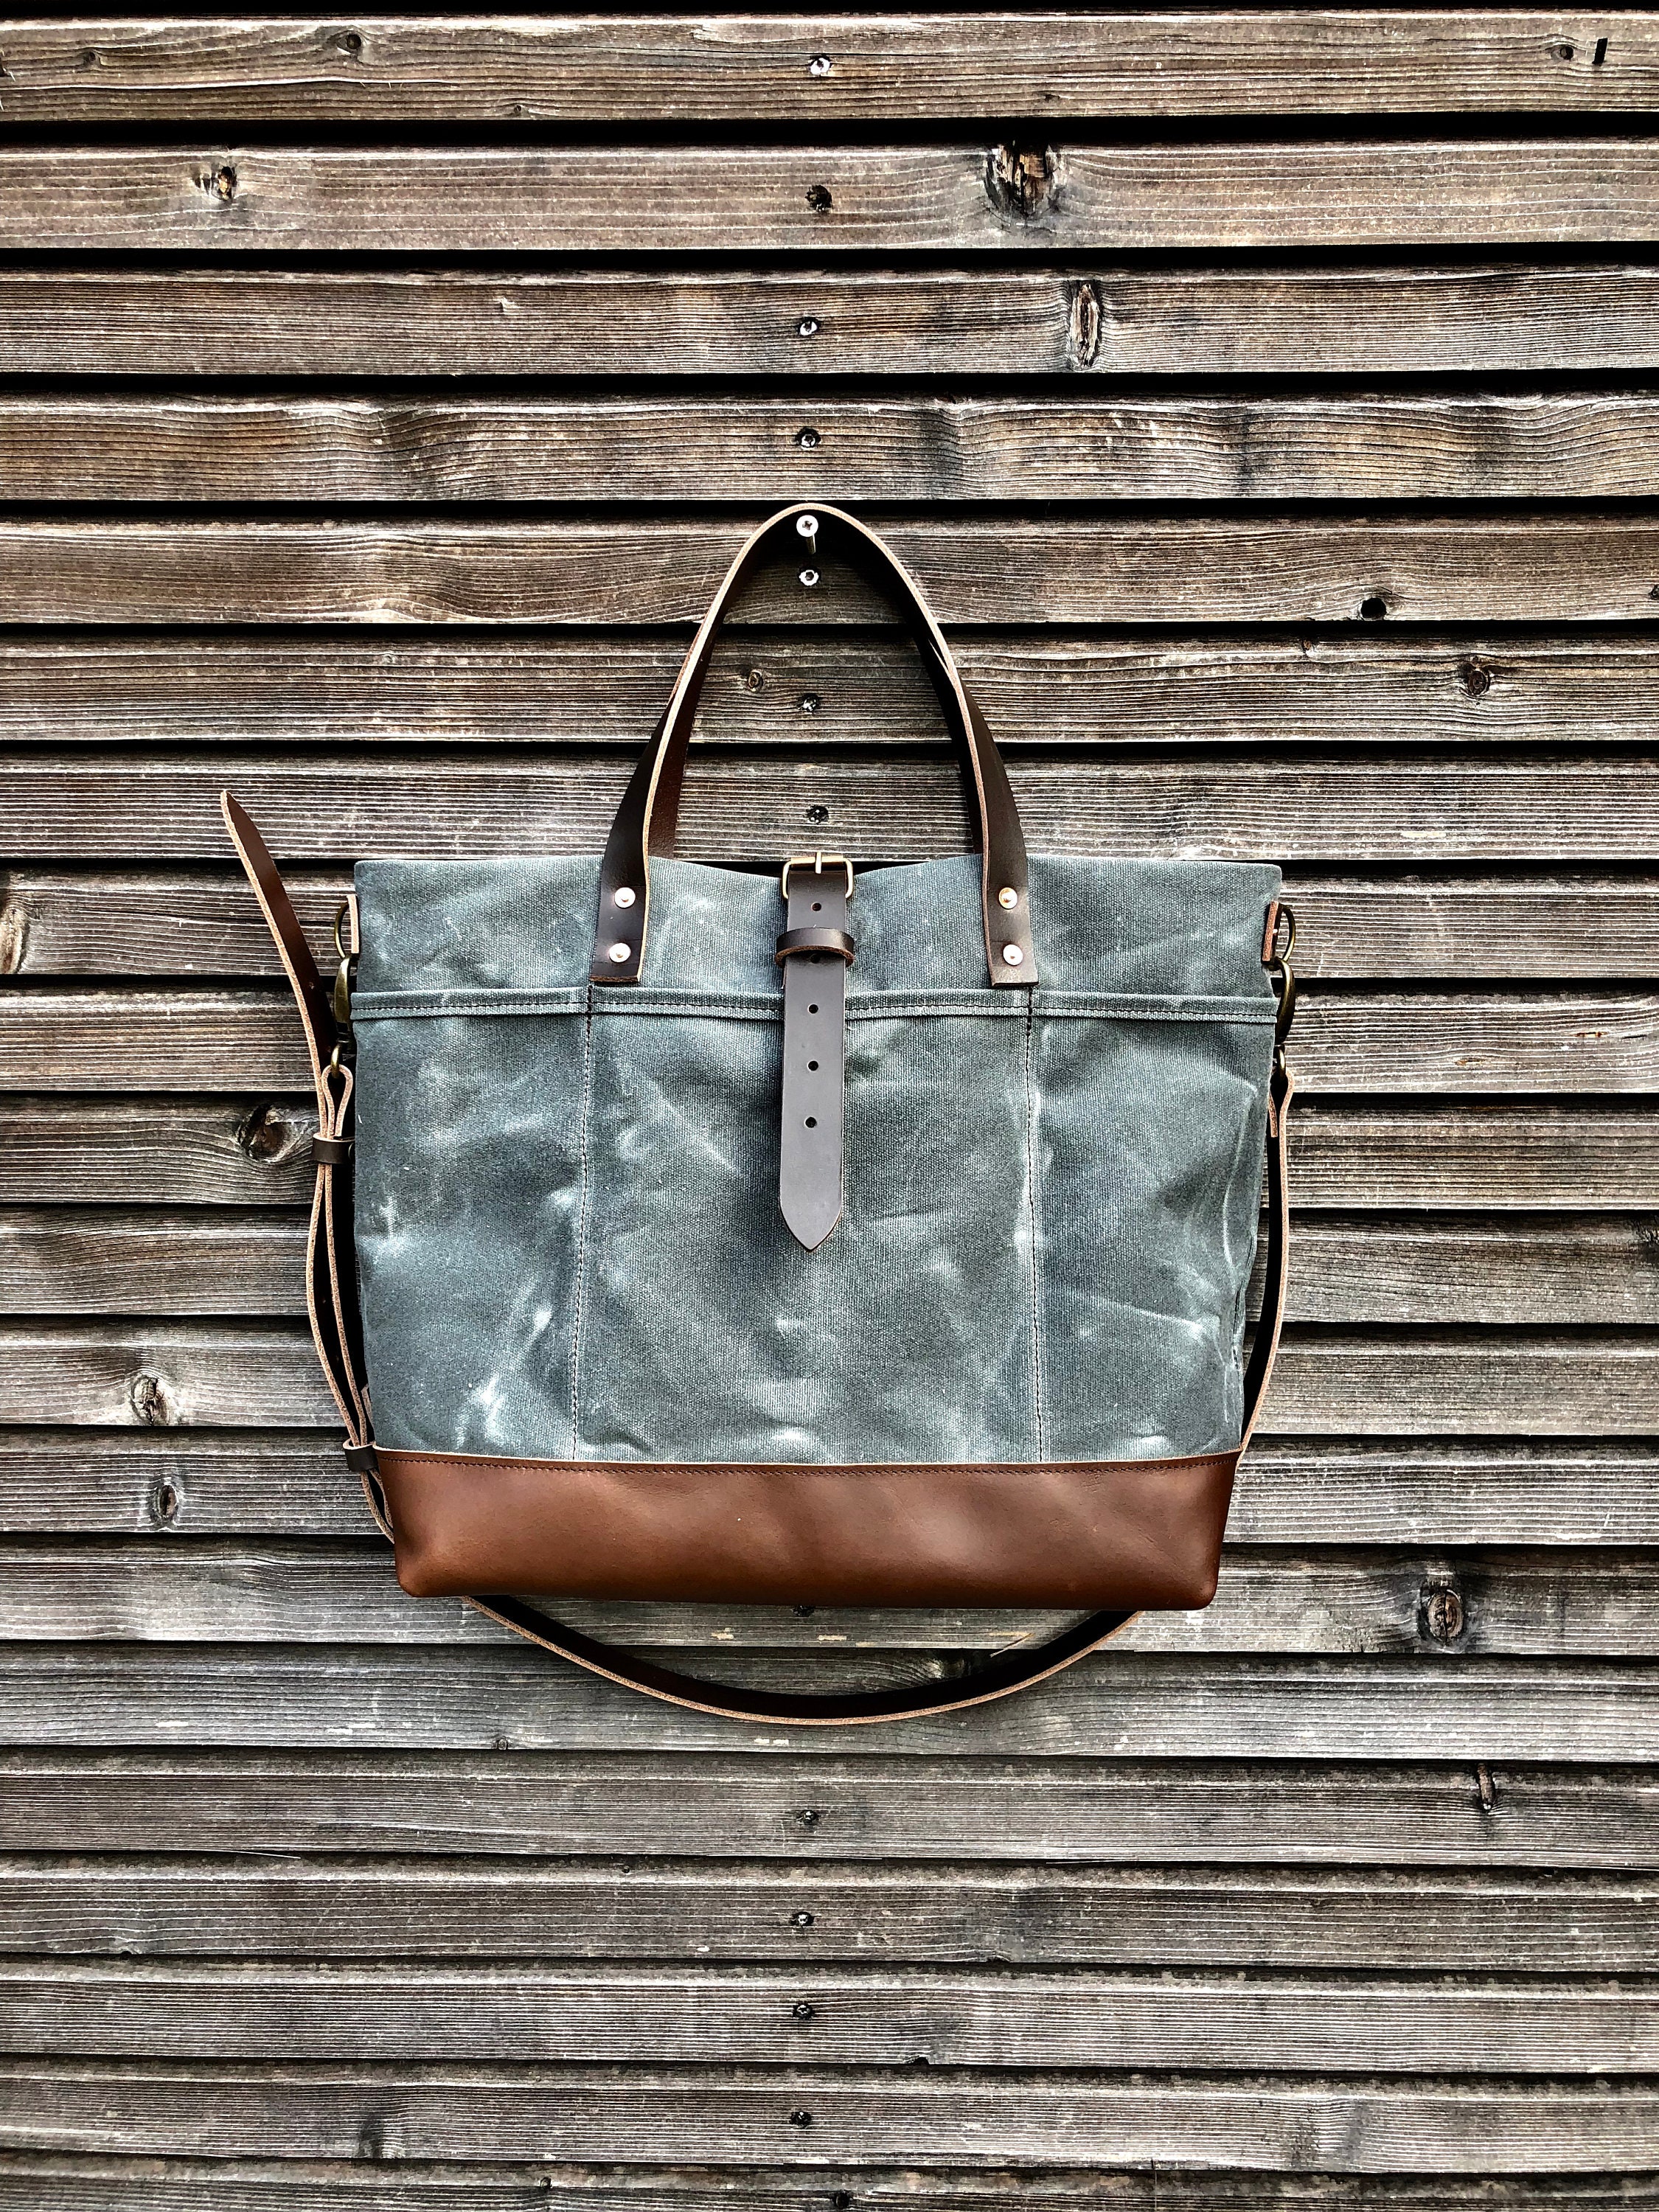 Tote Bag in Waxed Canvas With Leather Bottom and Cross Body - Etsy